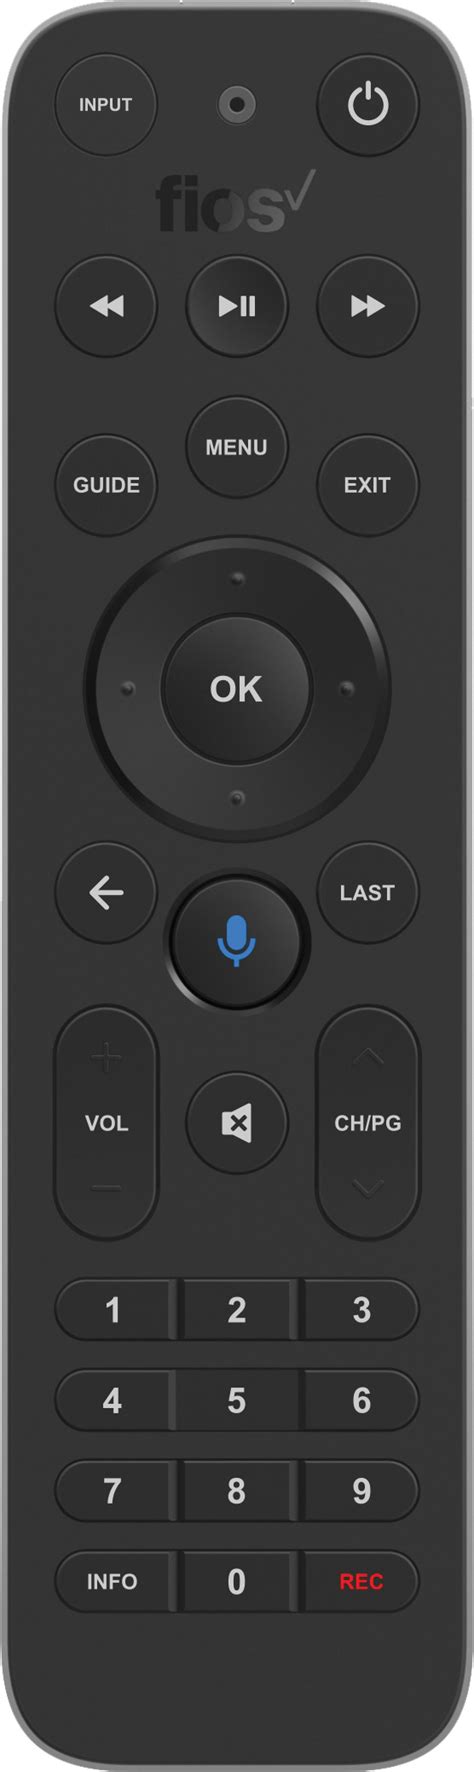 Roku. Stay updated on news and offers. The remote th